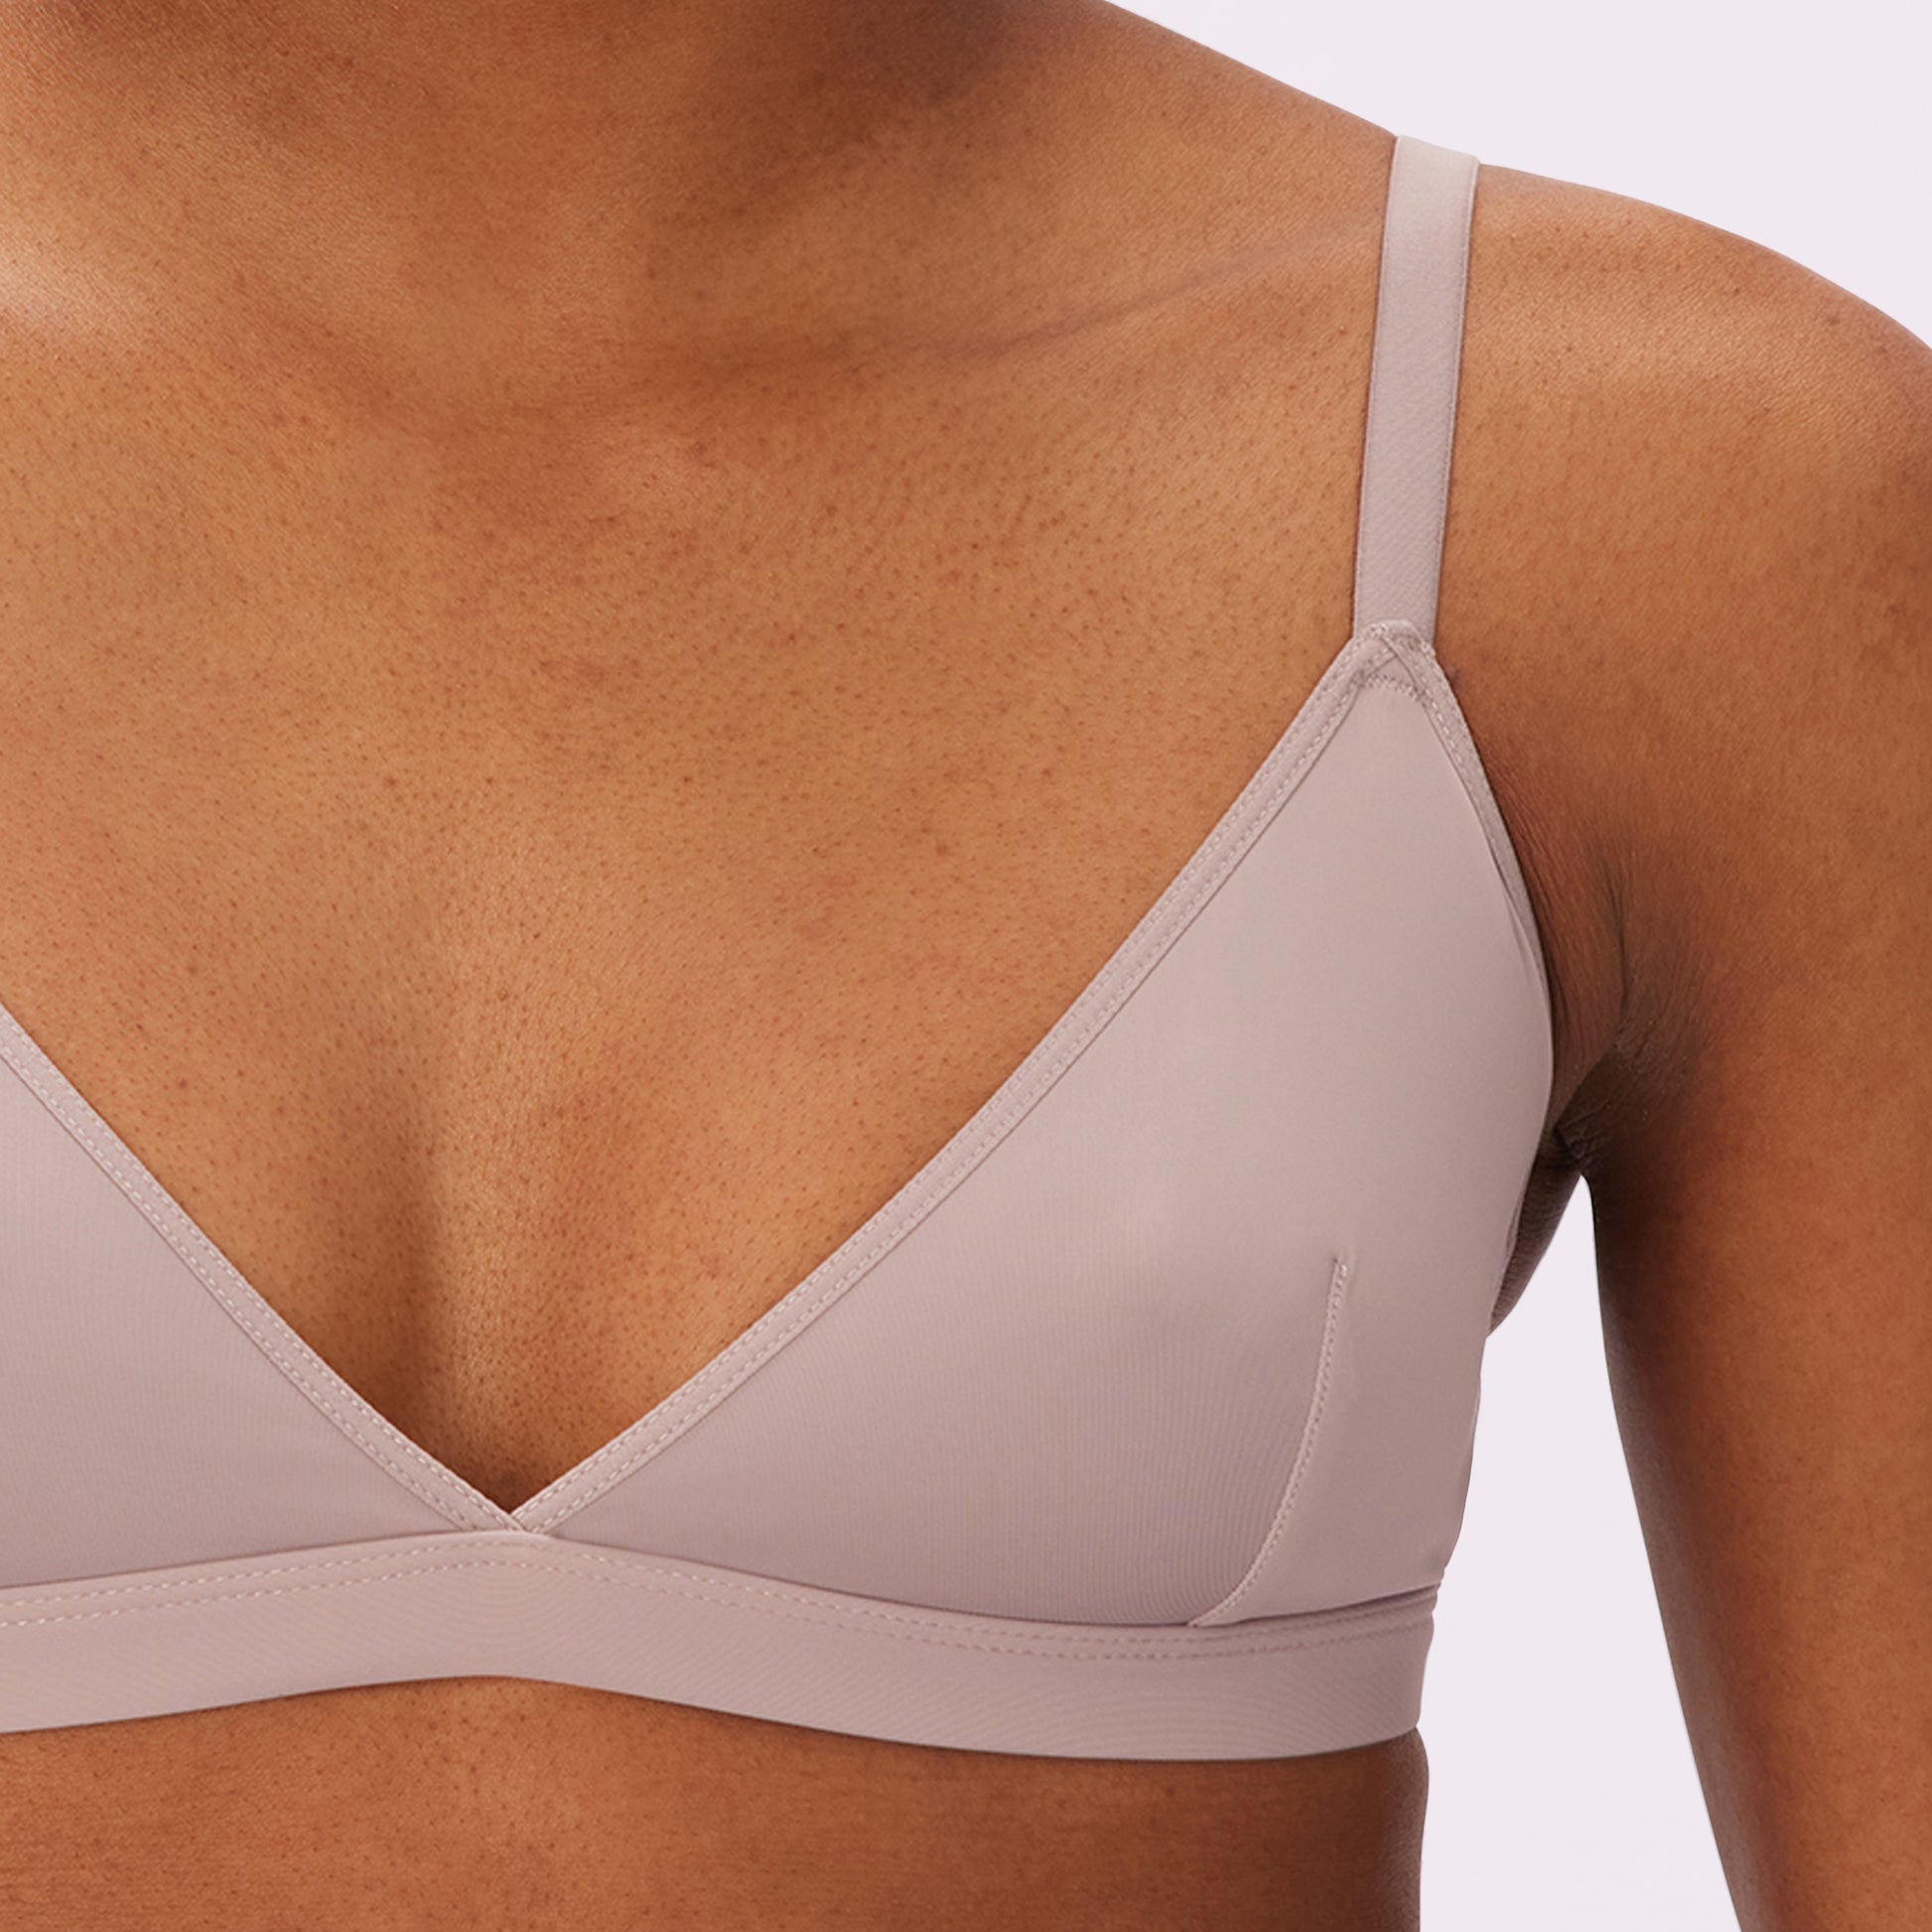 How to Measure Bra Size for Lululemon: A Simple Guide - Playbite